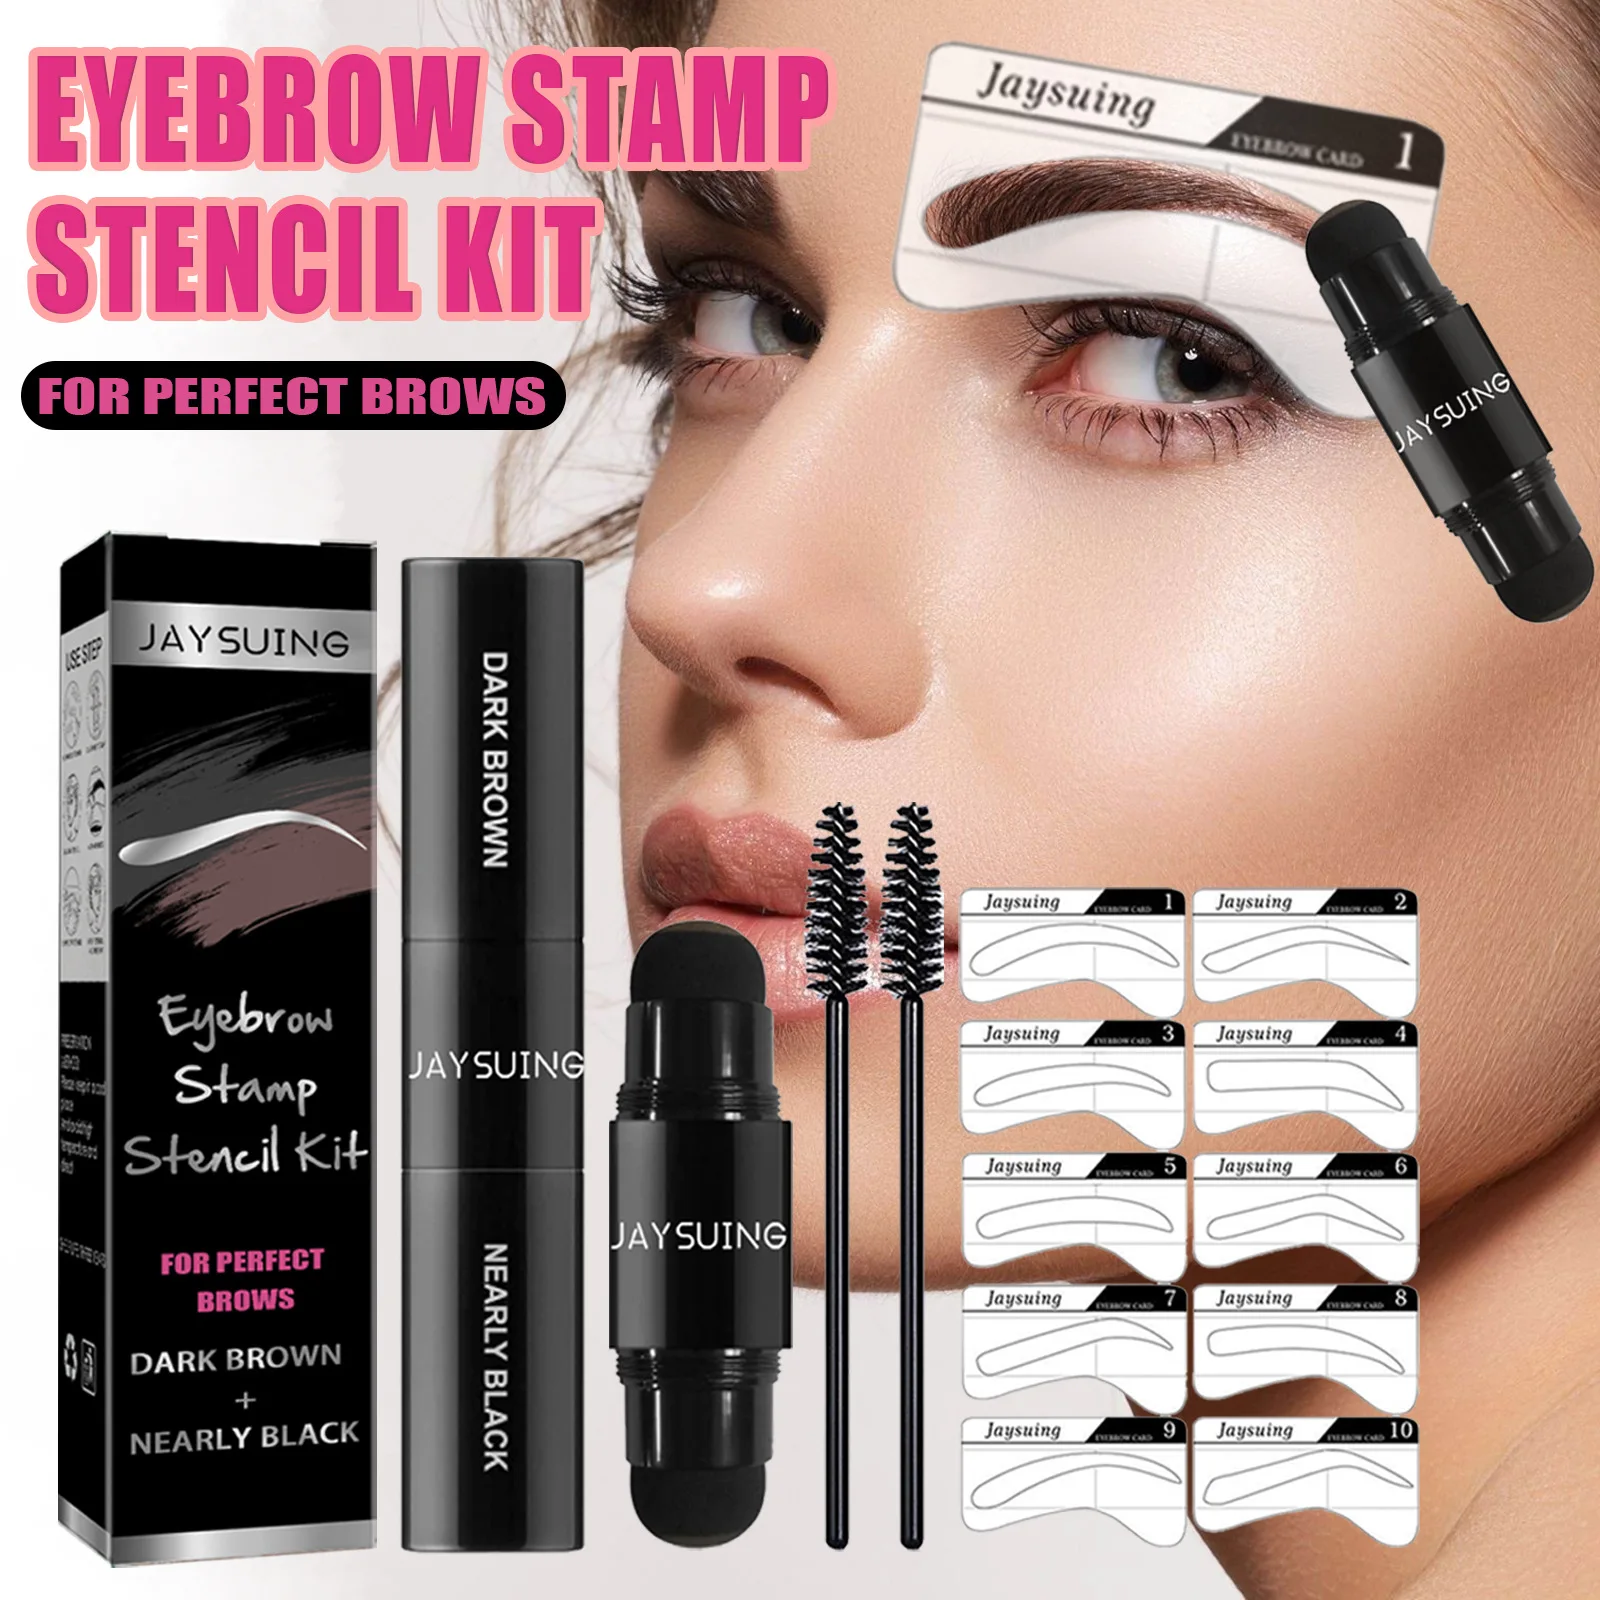 

Professional One Step Eyebrow Stamp Shaping Set 2 in 1 Pen Waterproof Makeup For Women Perfect Eye Brows Stencil And Templates